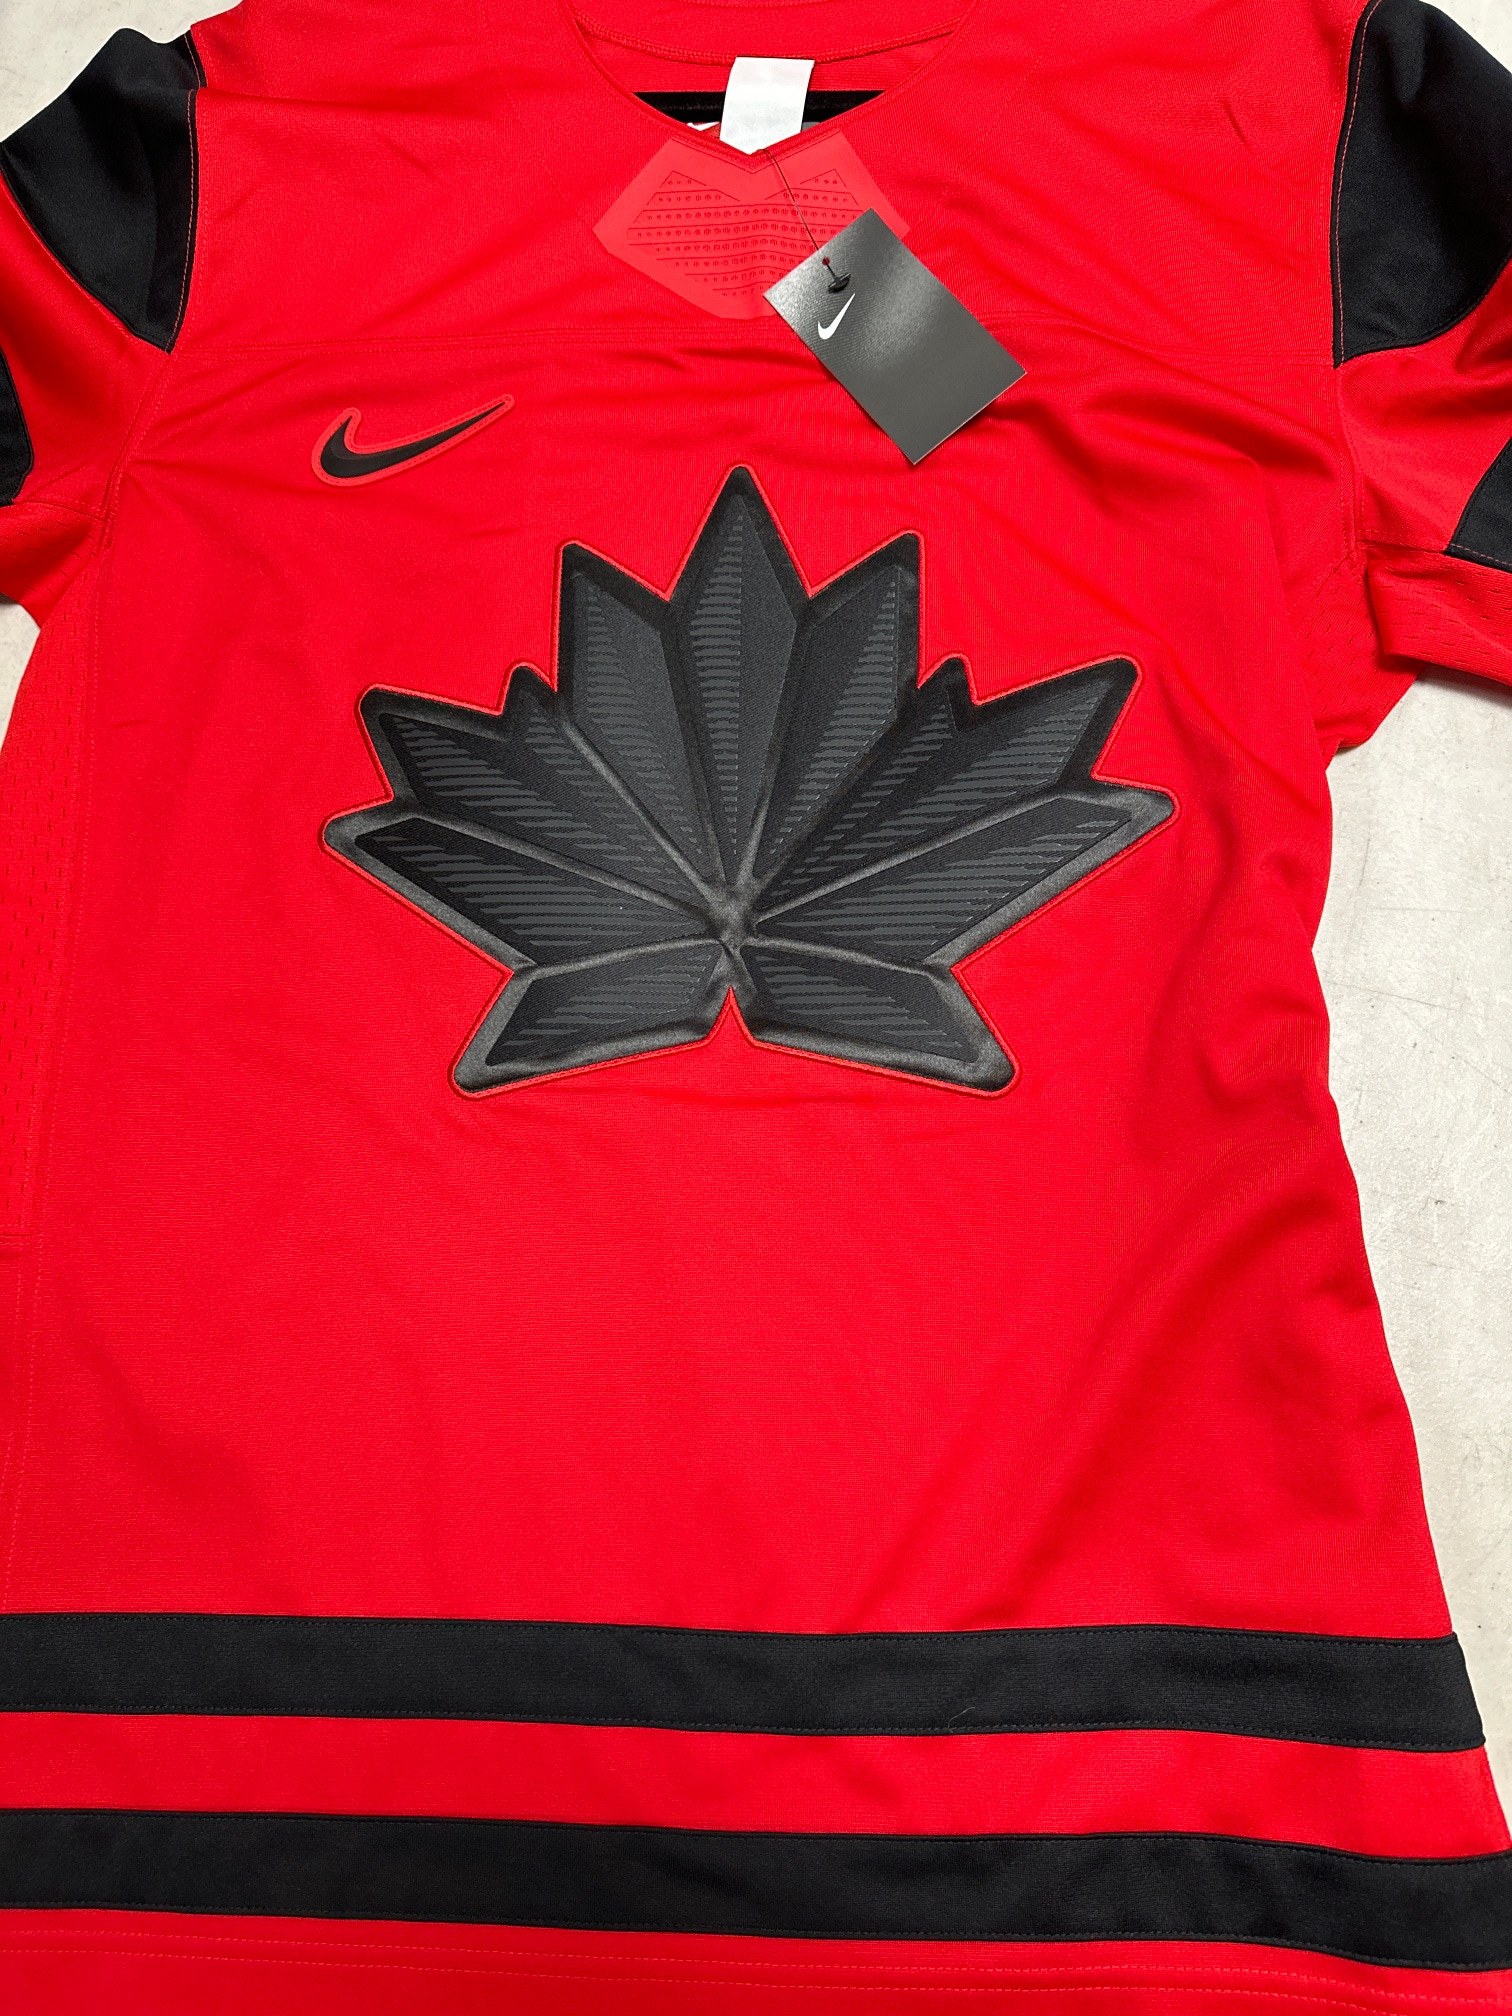 New Men's Canadian Olympic Nike  Jersey